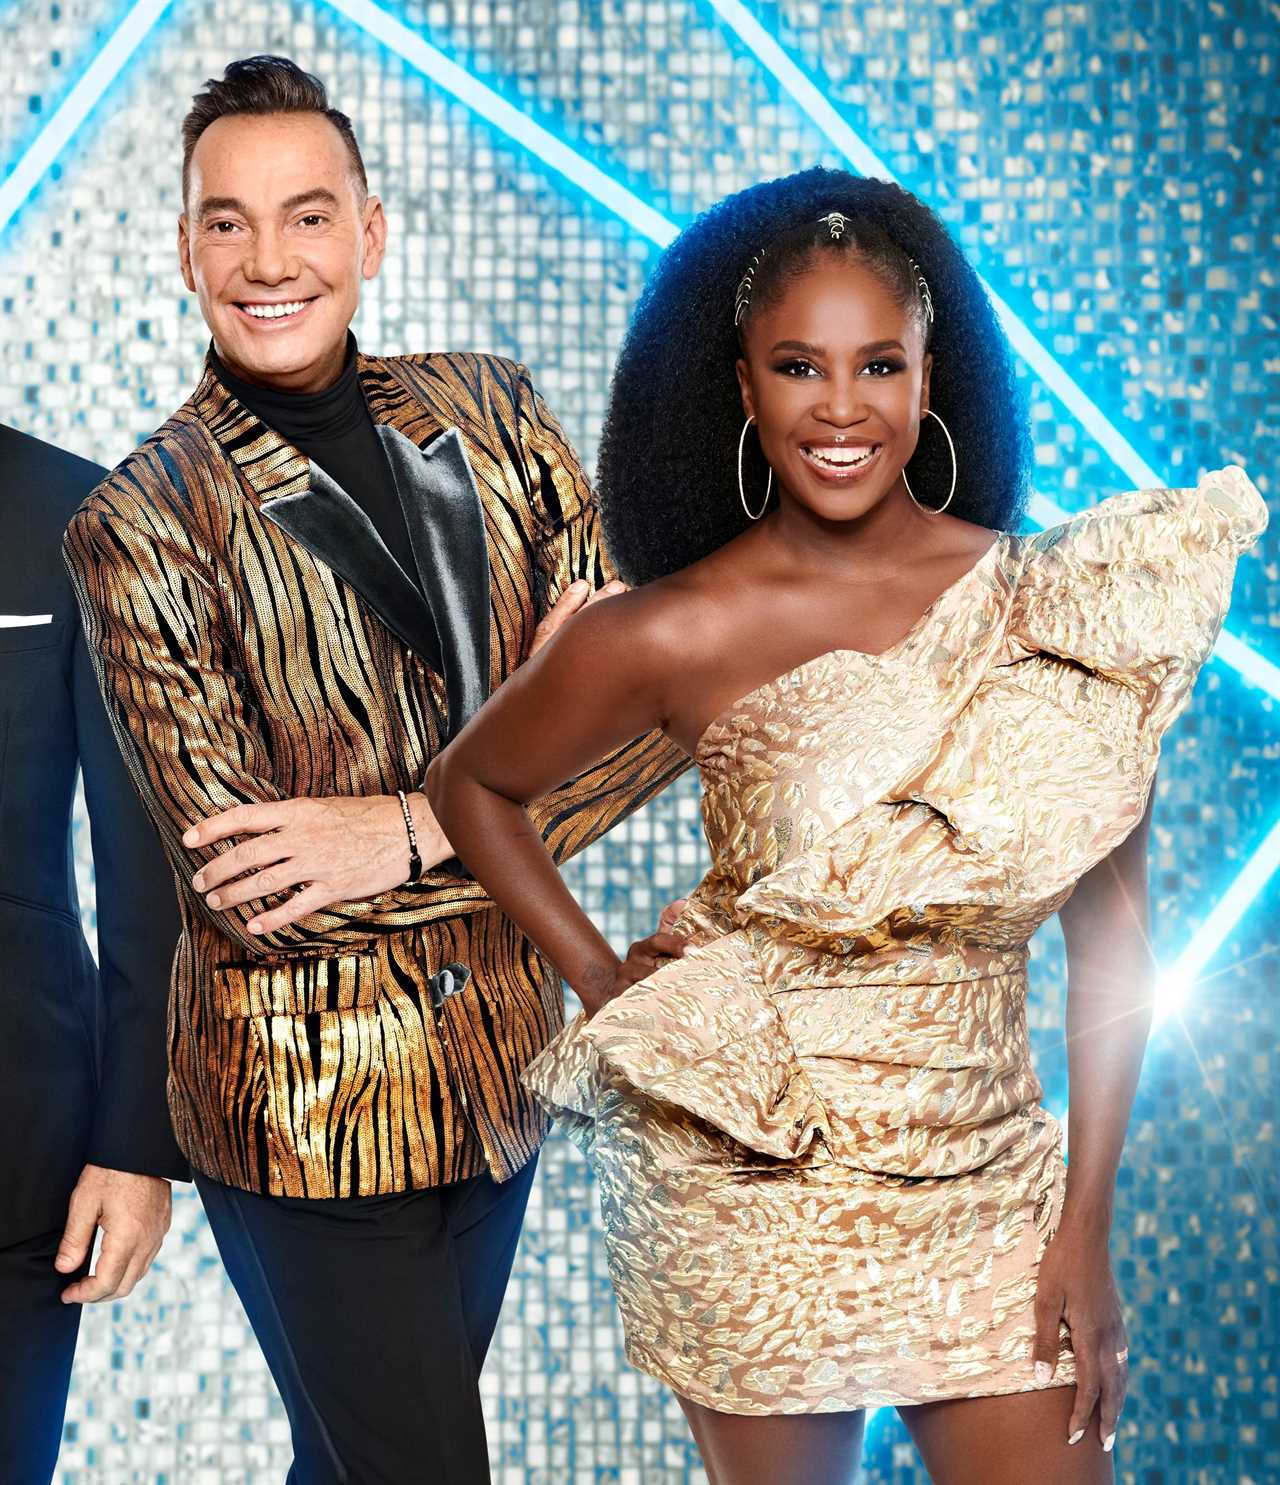 Strictly judge Motsi Mabuse breaks silence on ‘feud’ with Craig Revel Horwood after he slams her as a diva